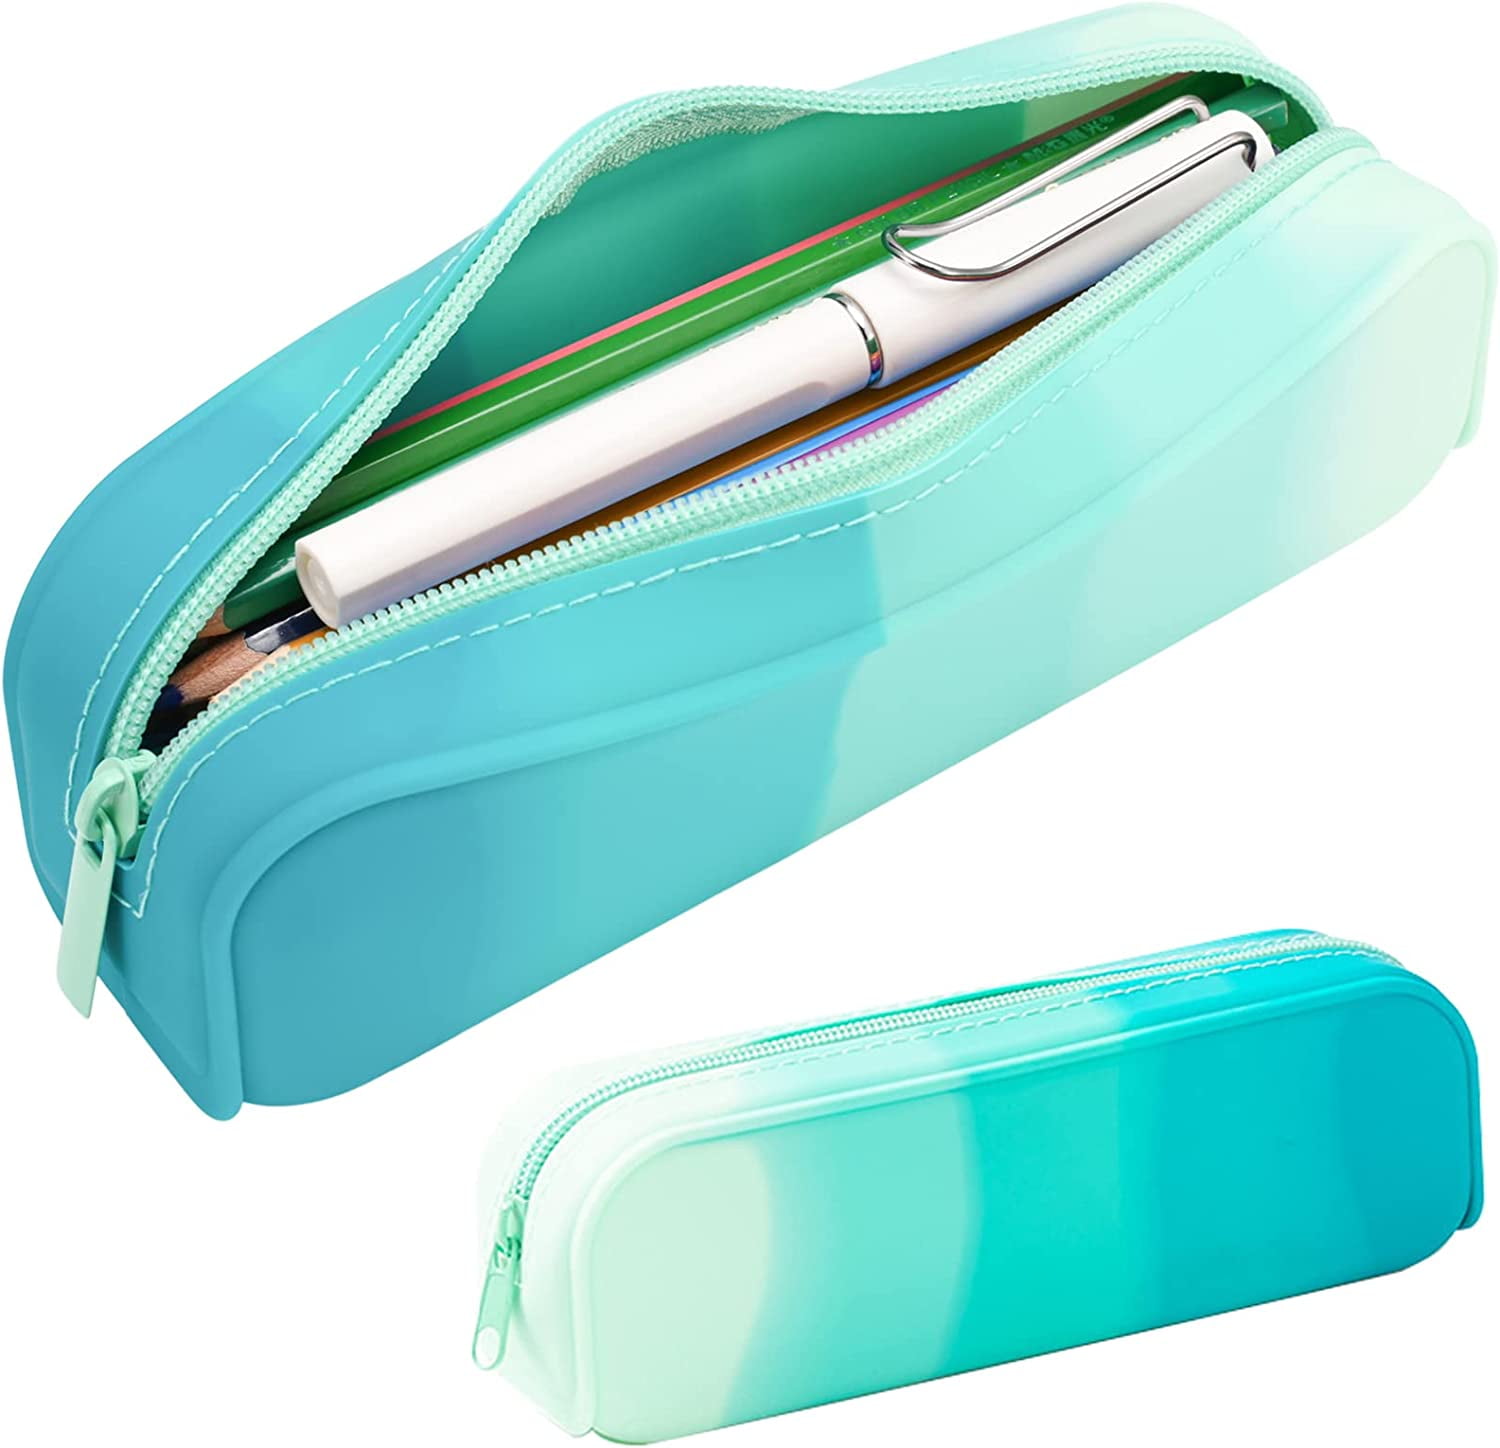 GGOOB Clear Pencil Pouch Aesthetic School Supplies Large Cute Pencil Case for Girls Preppy Pencil Case Aesthetic (Green,With Clip & Sticky Note)